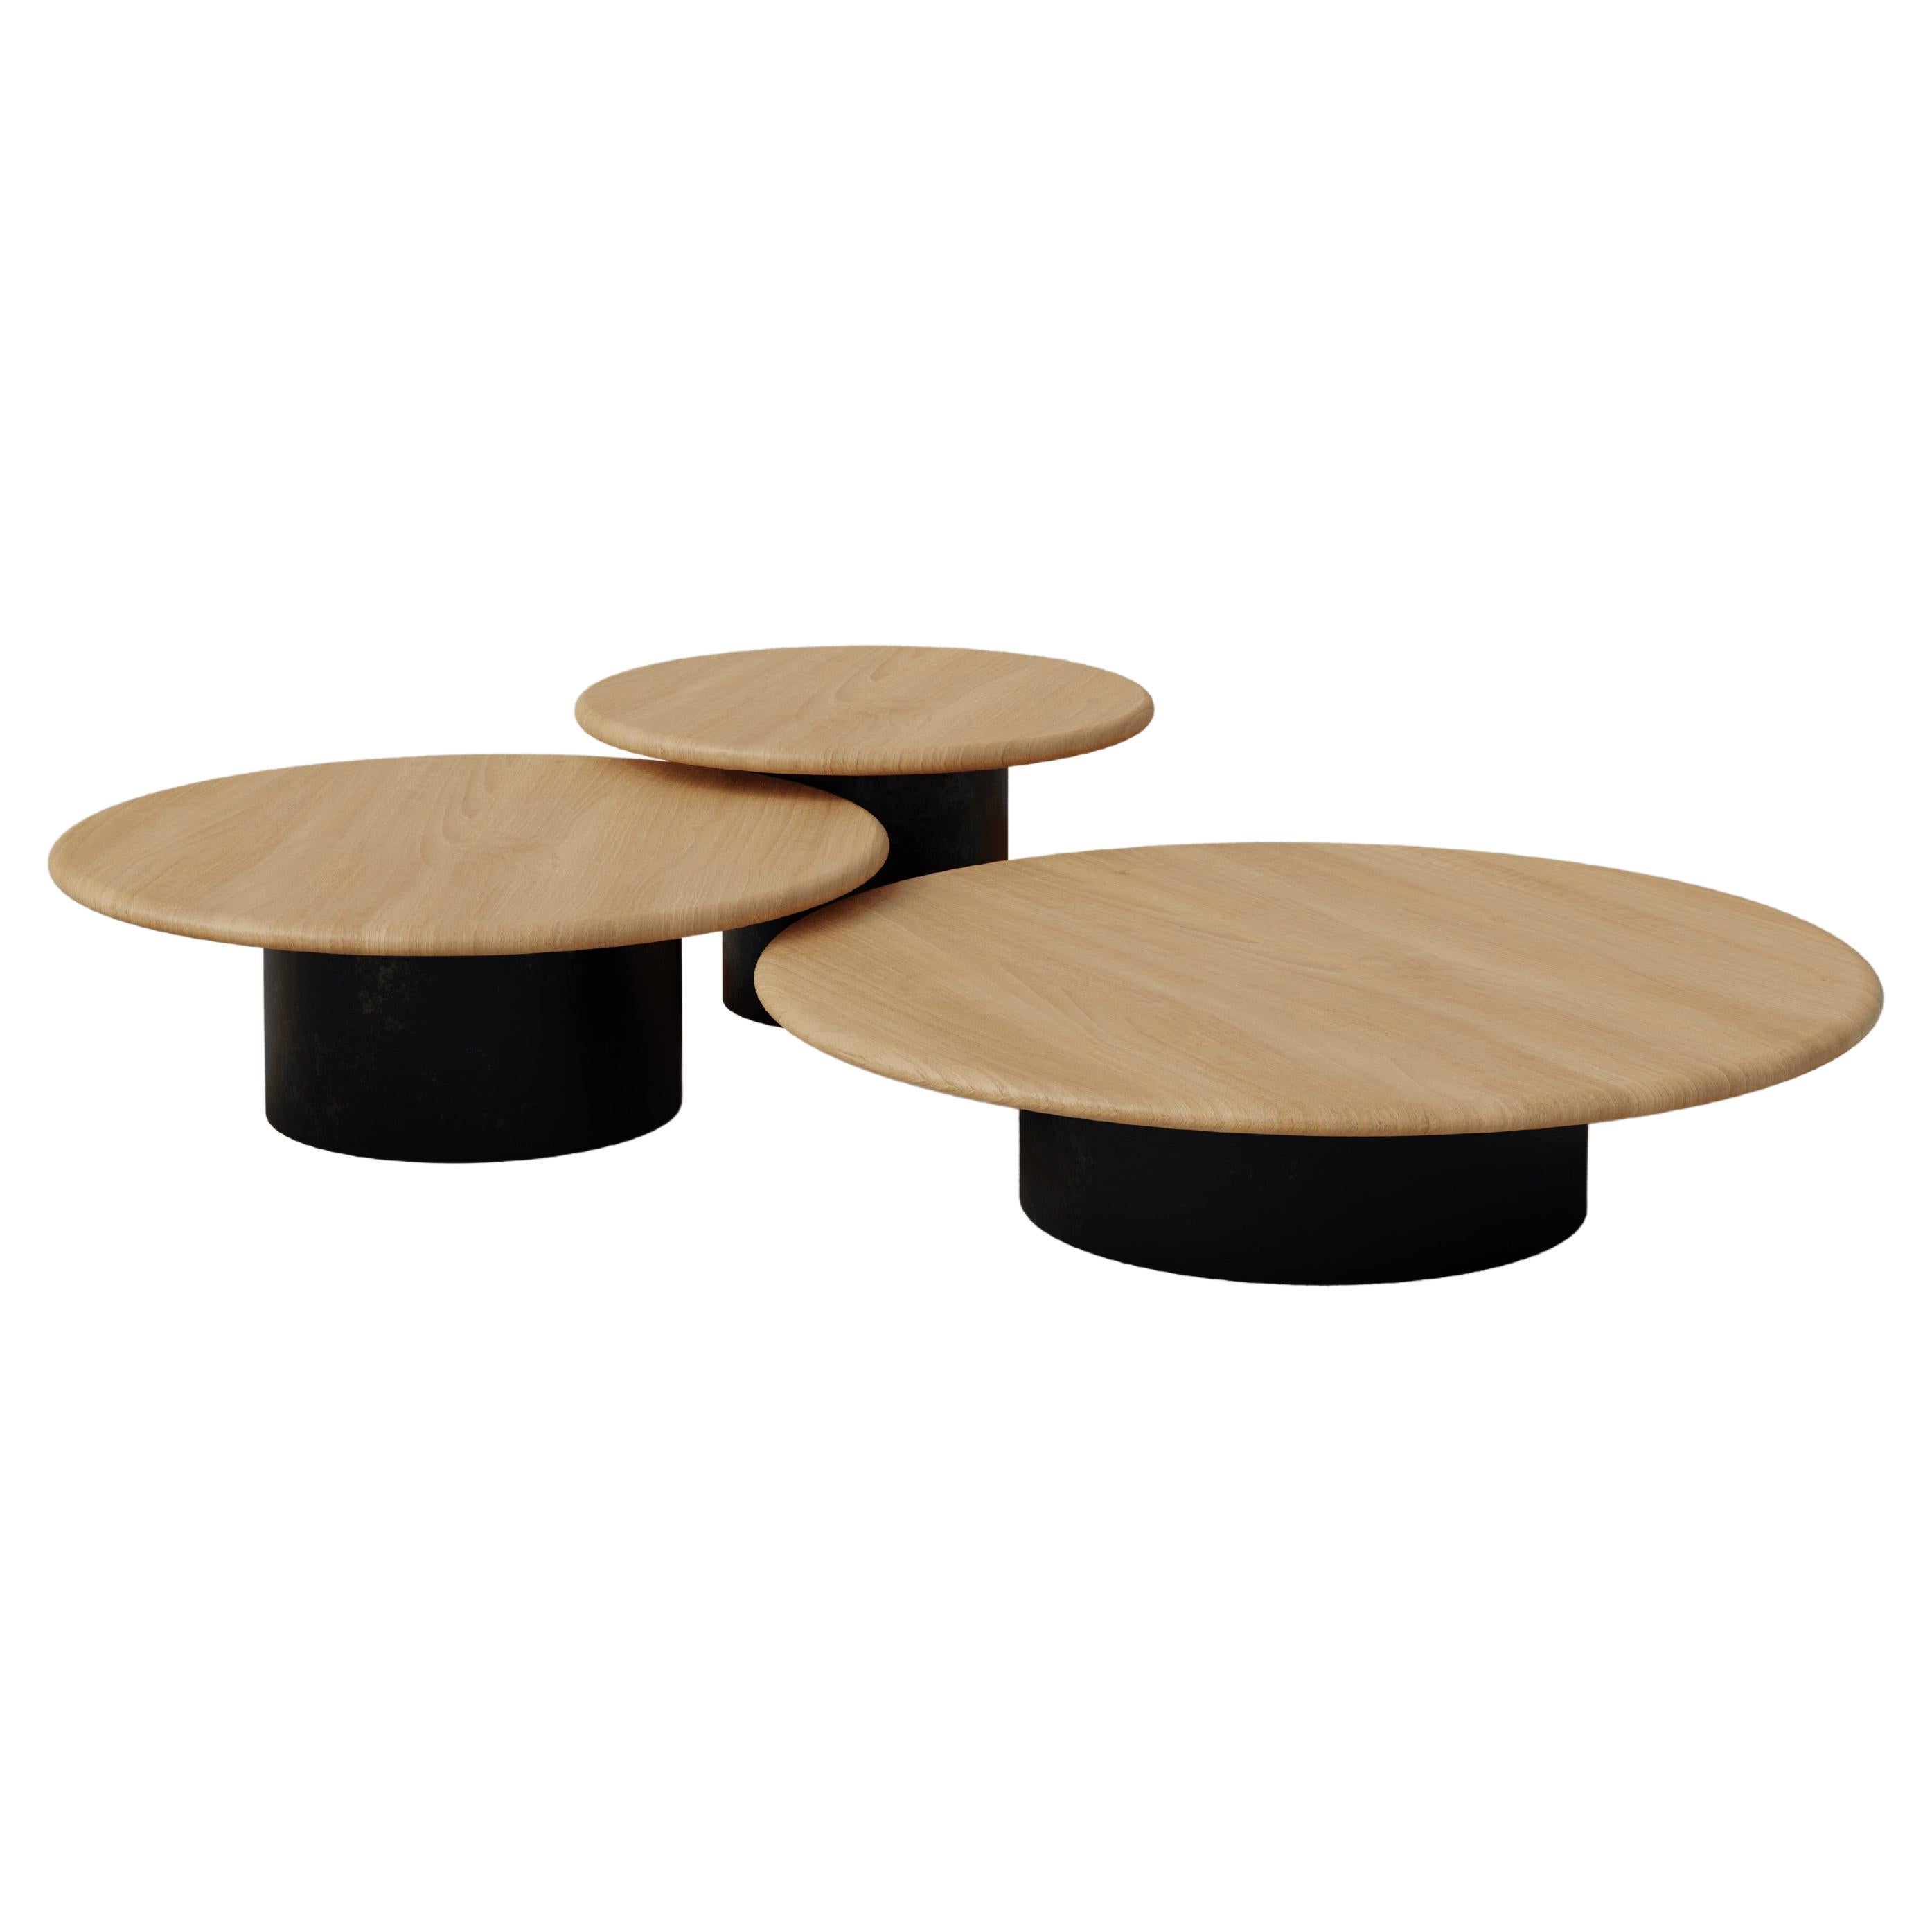 Raindrop Coffee Table Set, 600, 800, 1000, Oak / Patinated For Sale